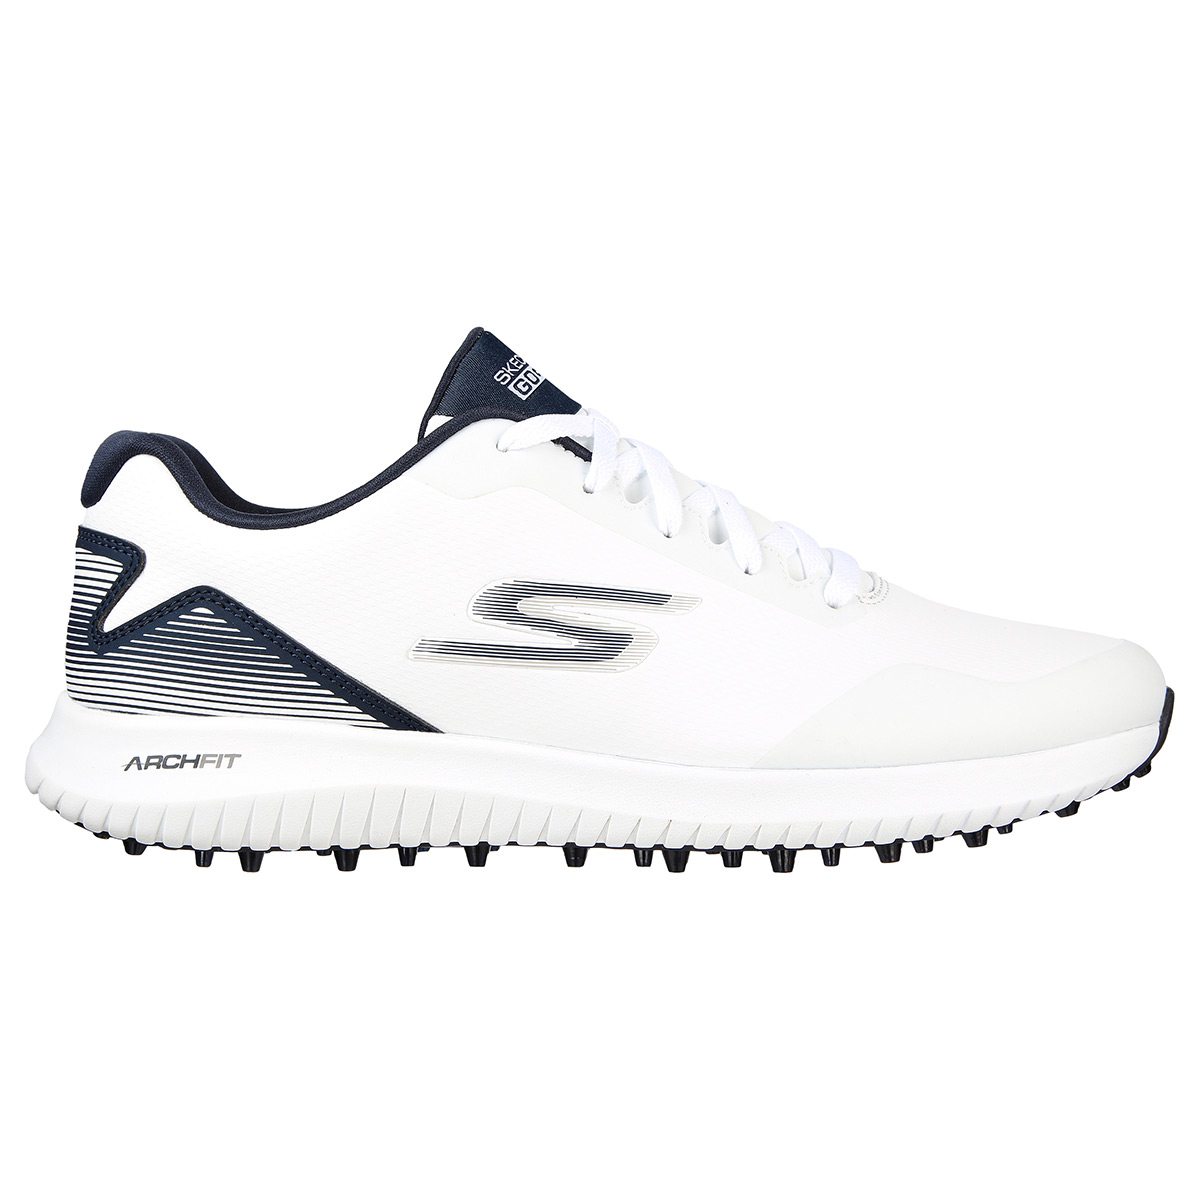 Skechers GO Max 2 Waterproof Spikeless Golf Shoes from golf